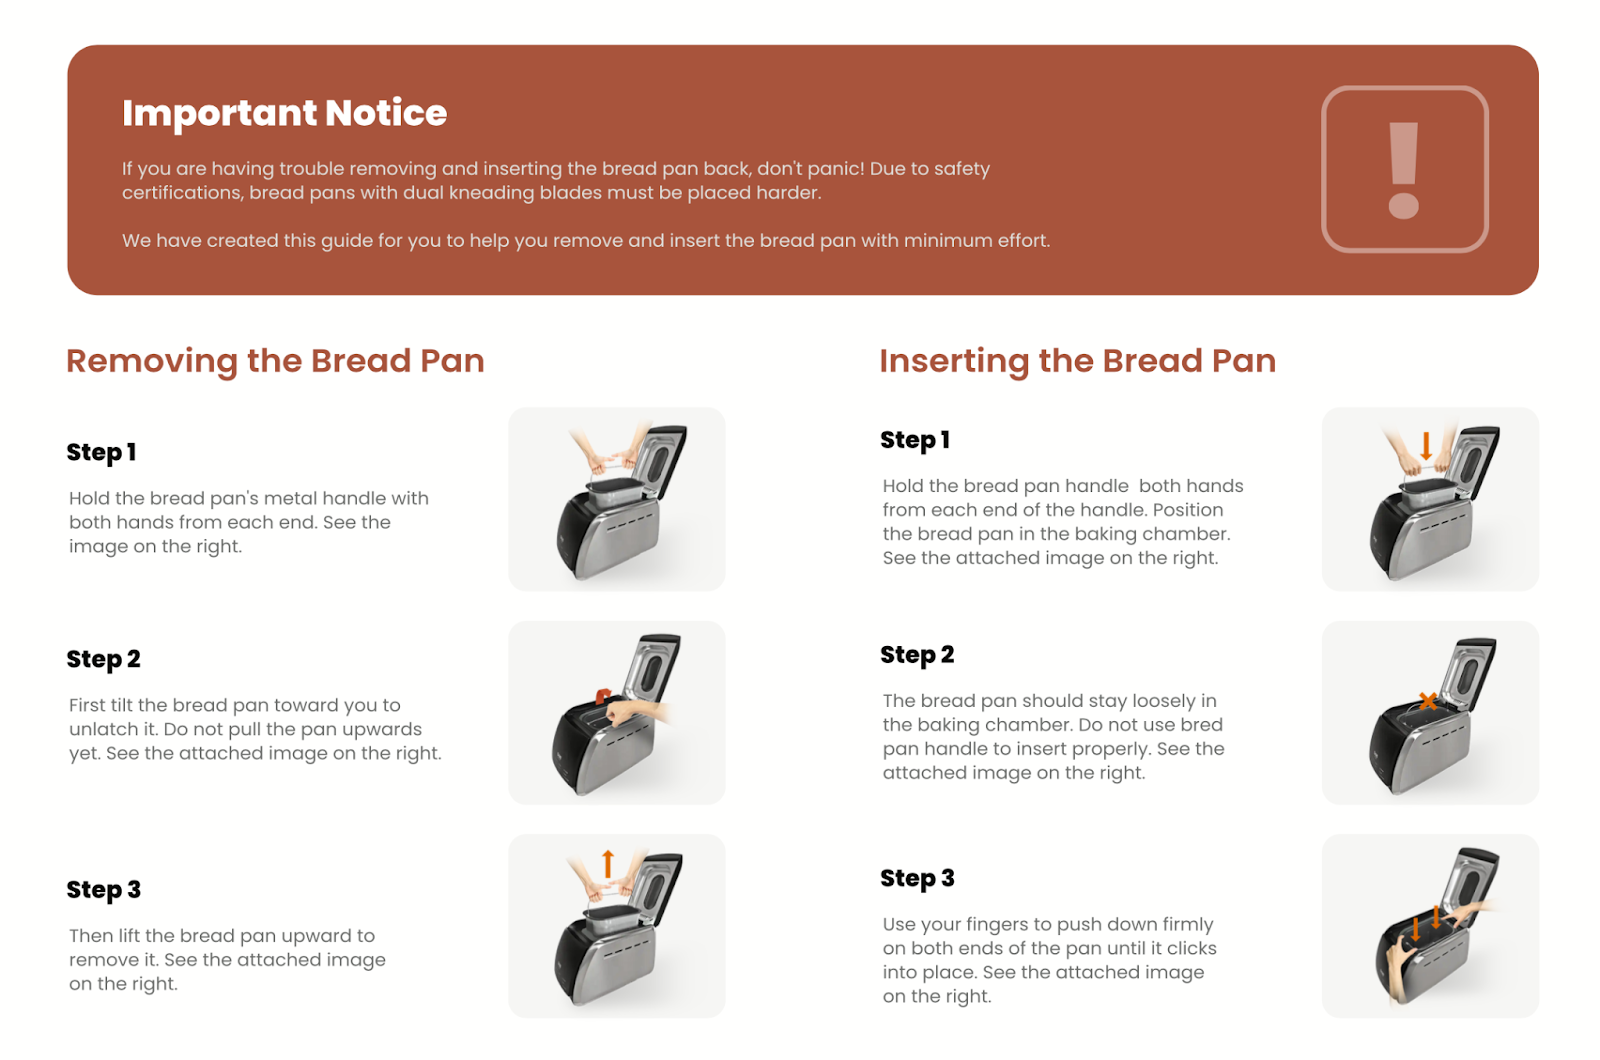 This image shows how to insert and remove the SAKI Bread Maker Bread Pan.